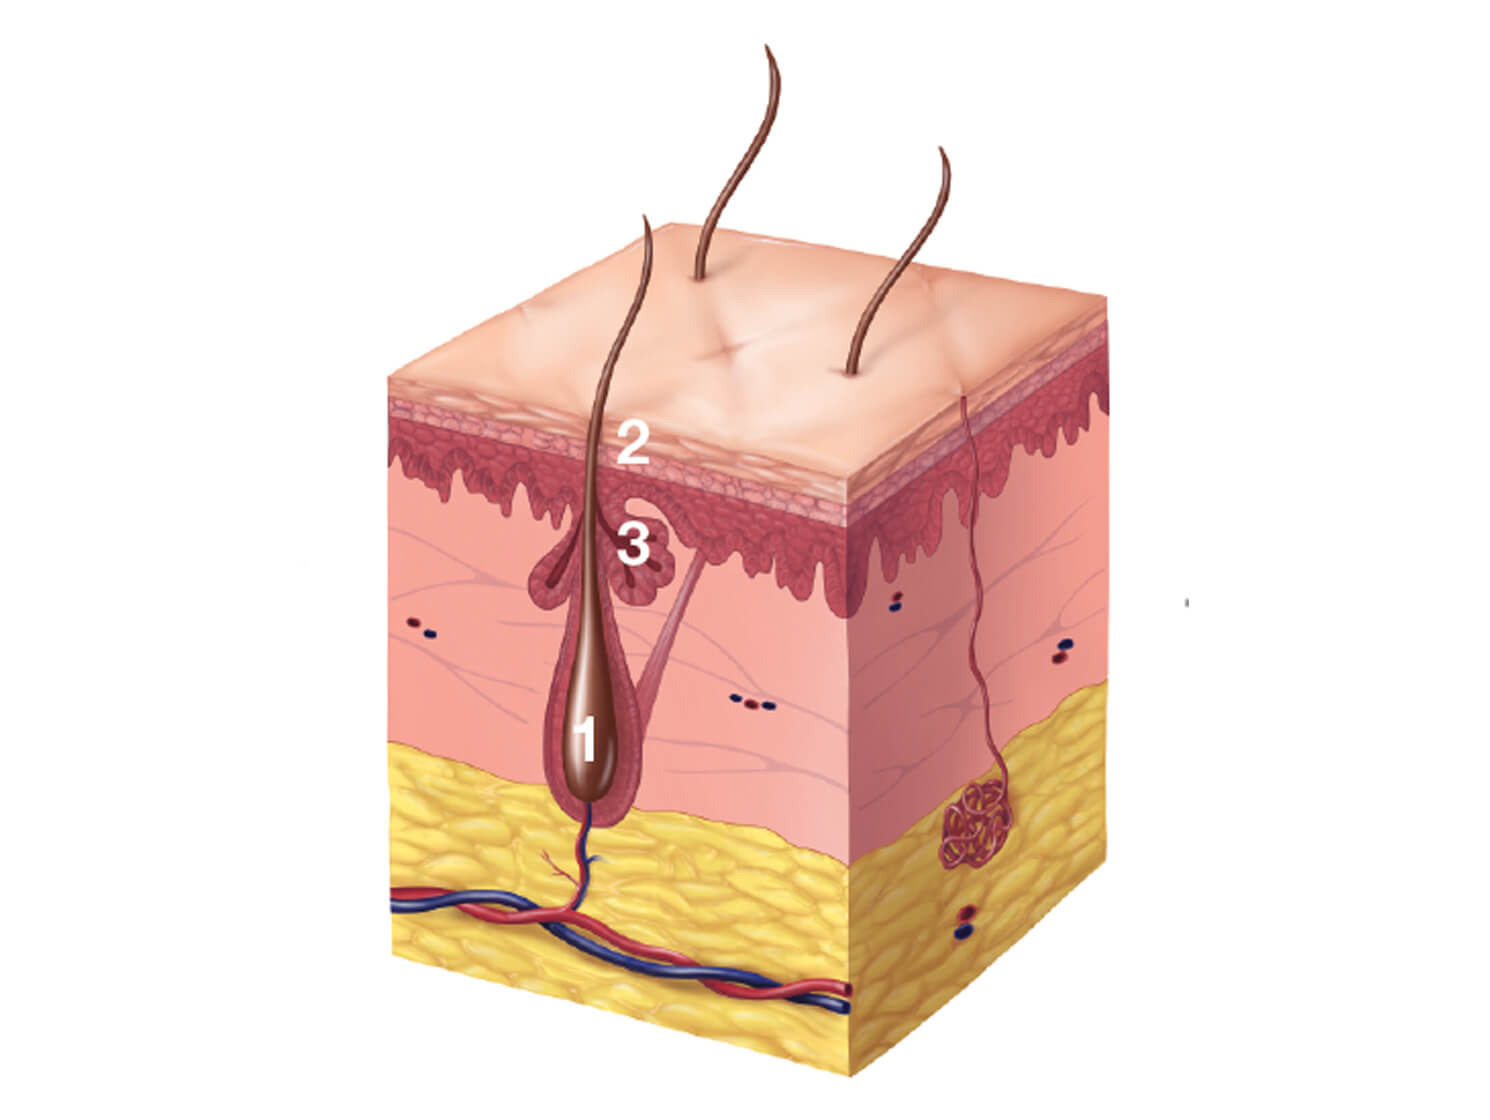 Illustration of a normal follicle